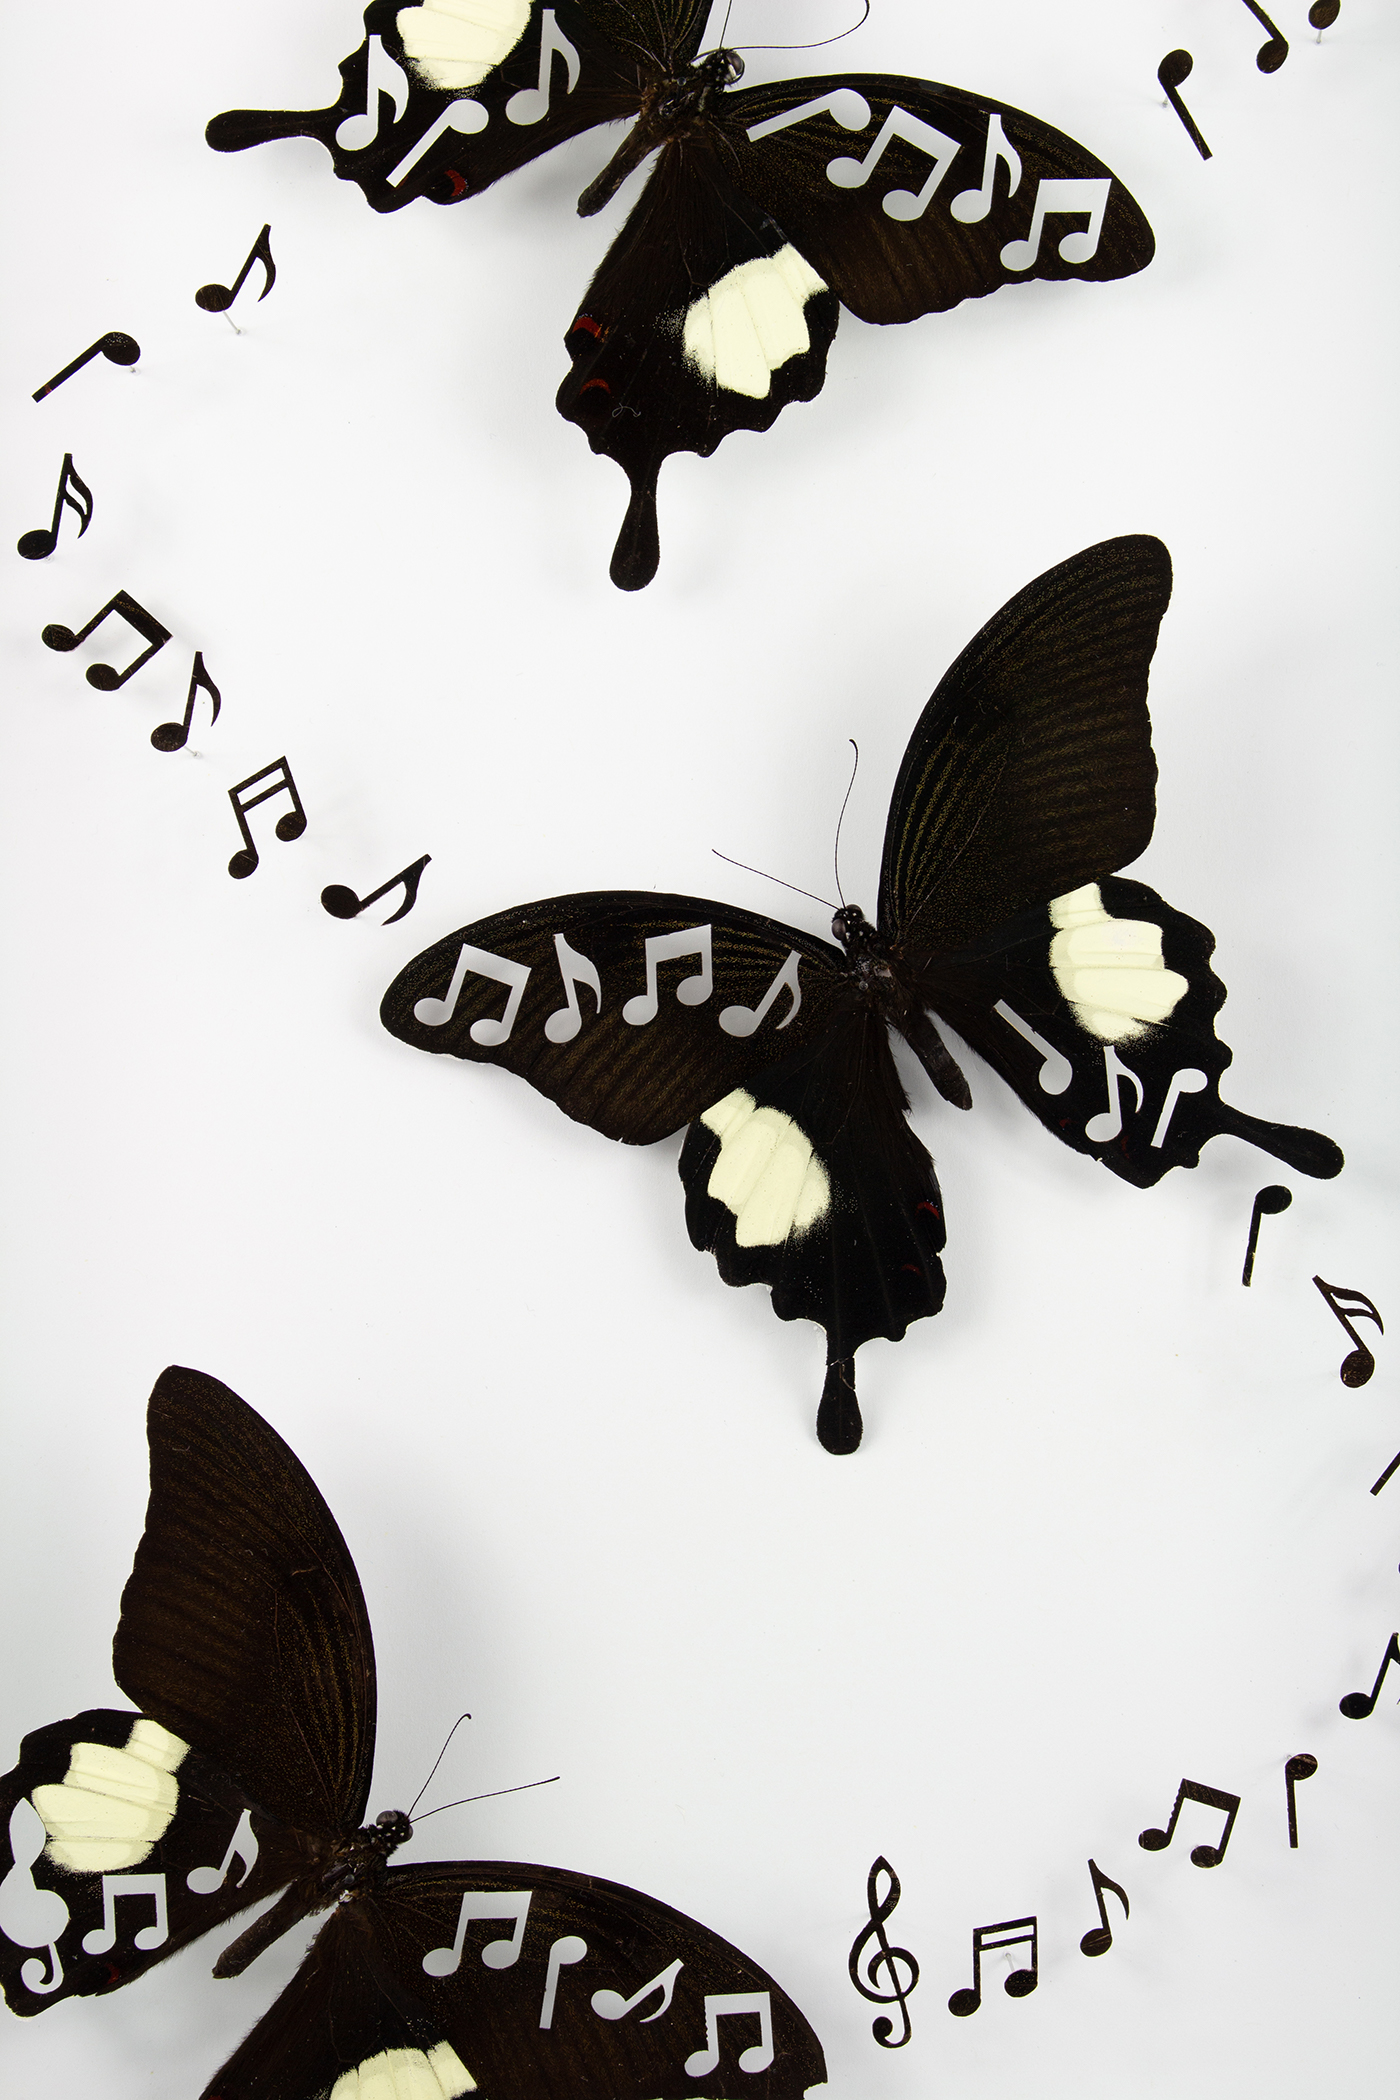 Vanitas 1 is a taxidermy artwork featuring three butterflies with music notes cut